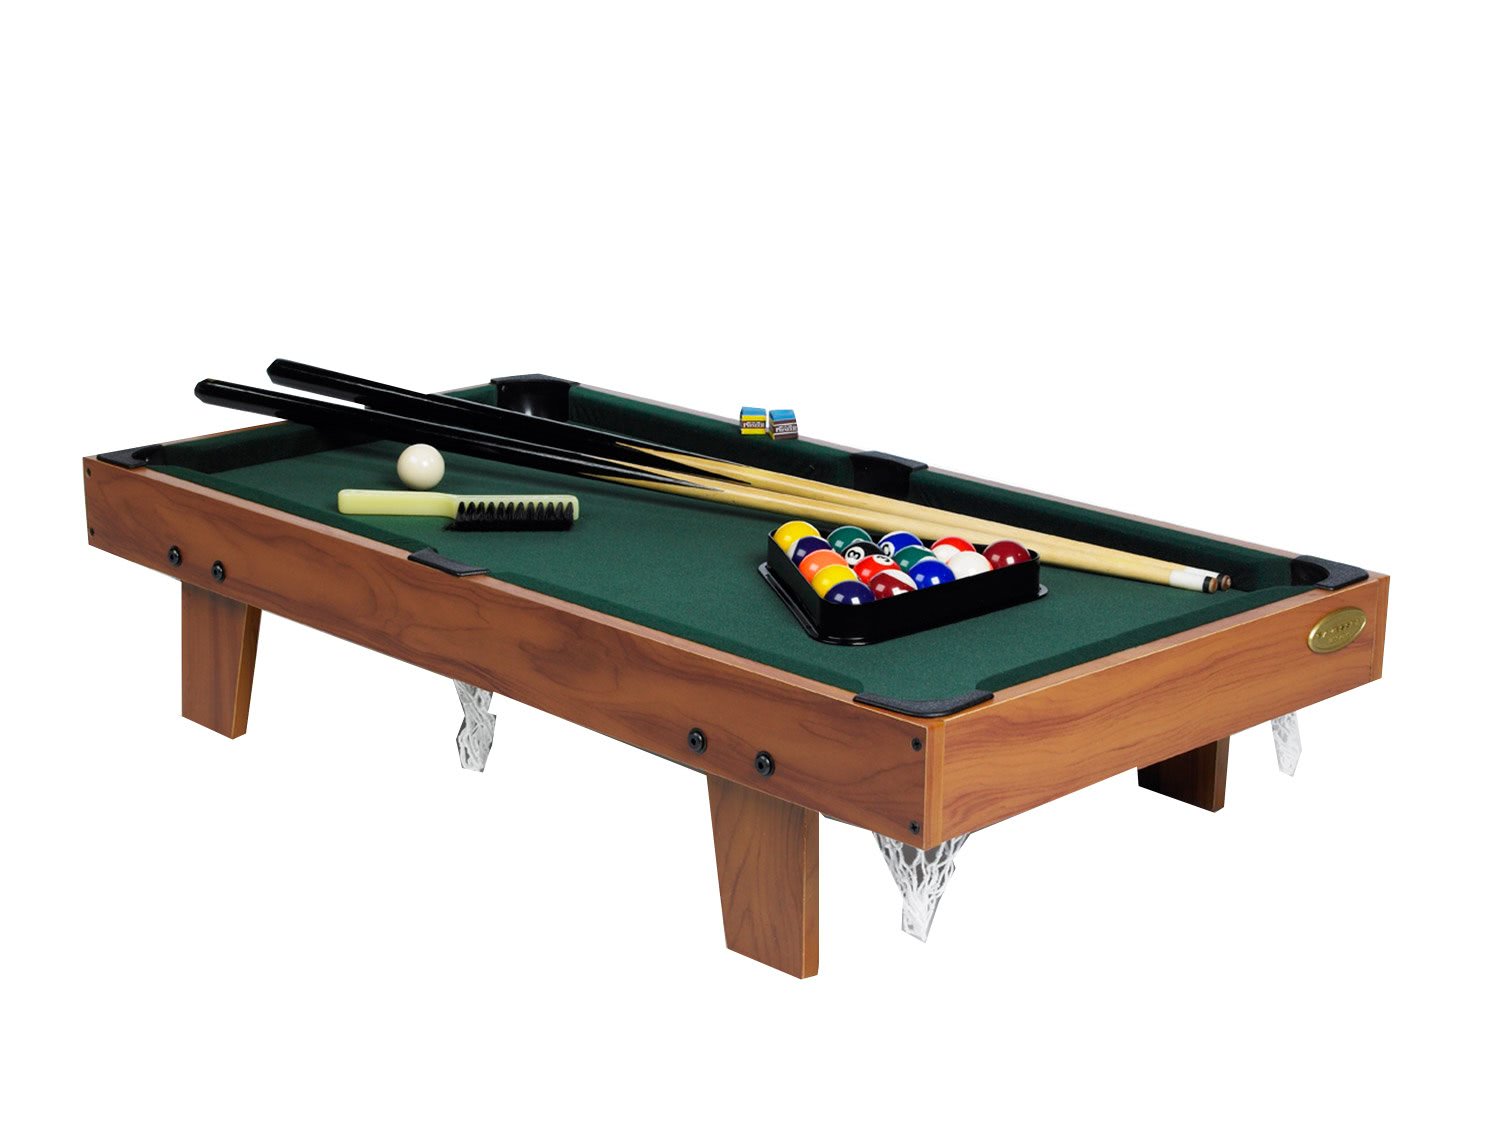 Gamesson LTH 3 foot Pool Table | Liberty Games